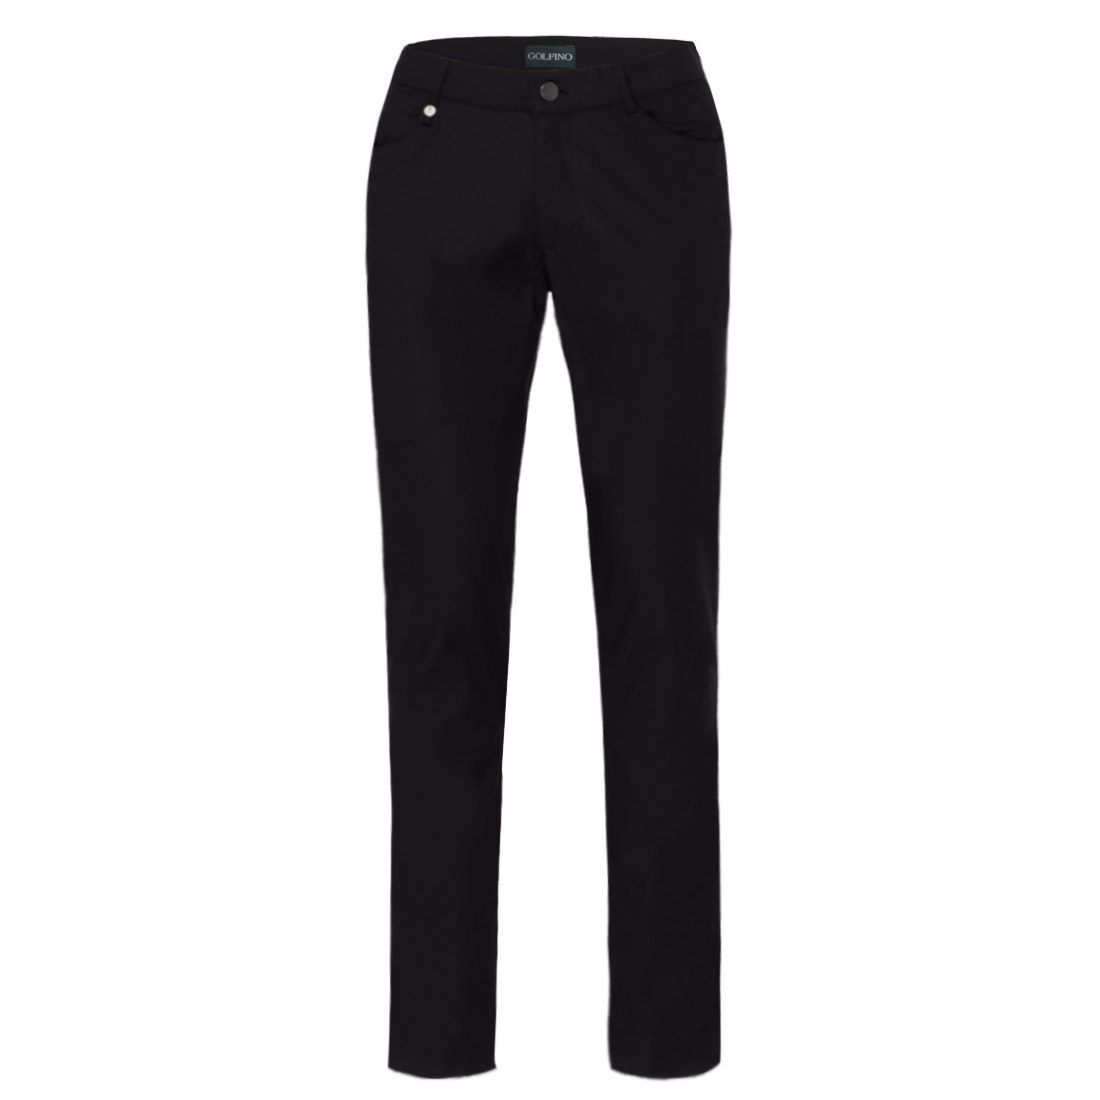 Men's premium casual golf trousers in 5-pocket style